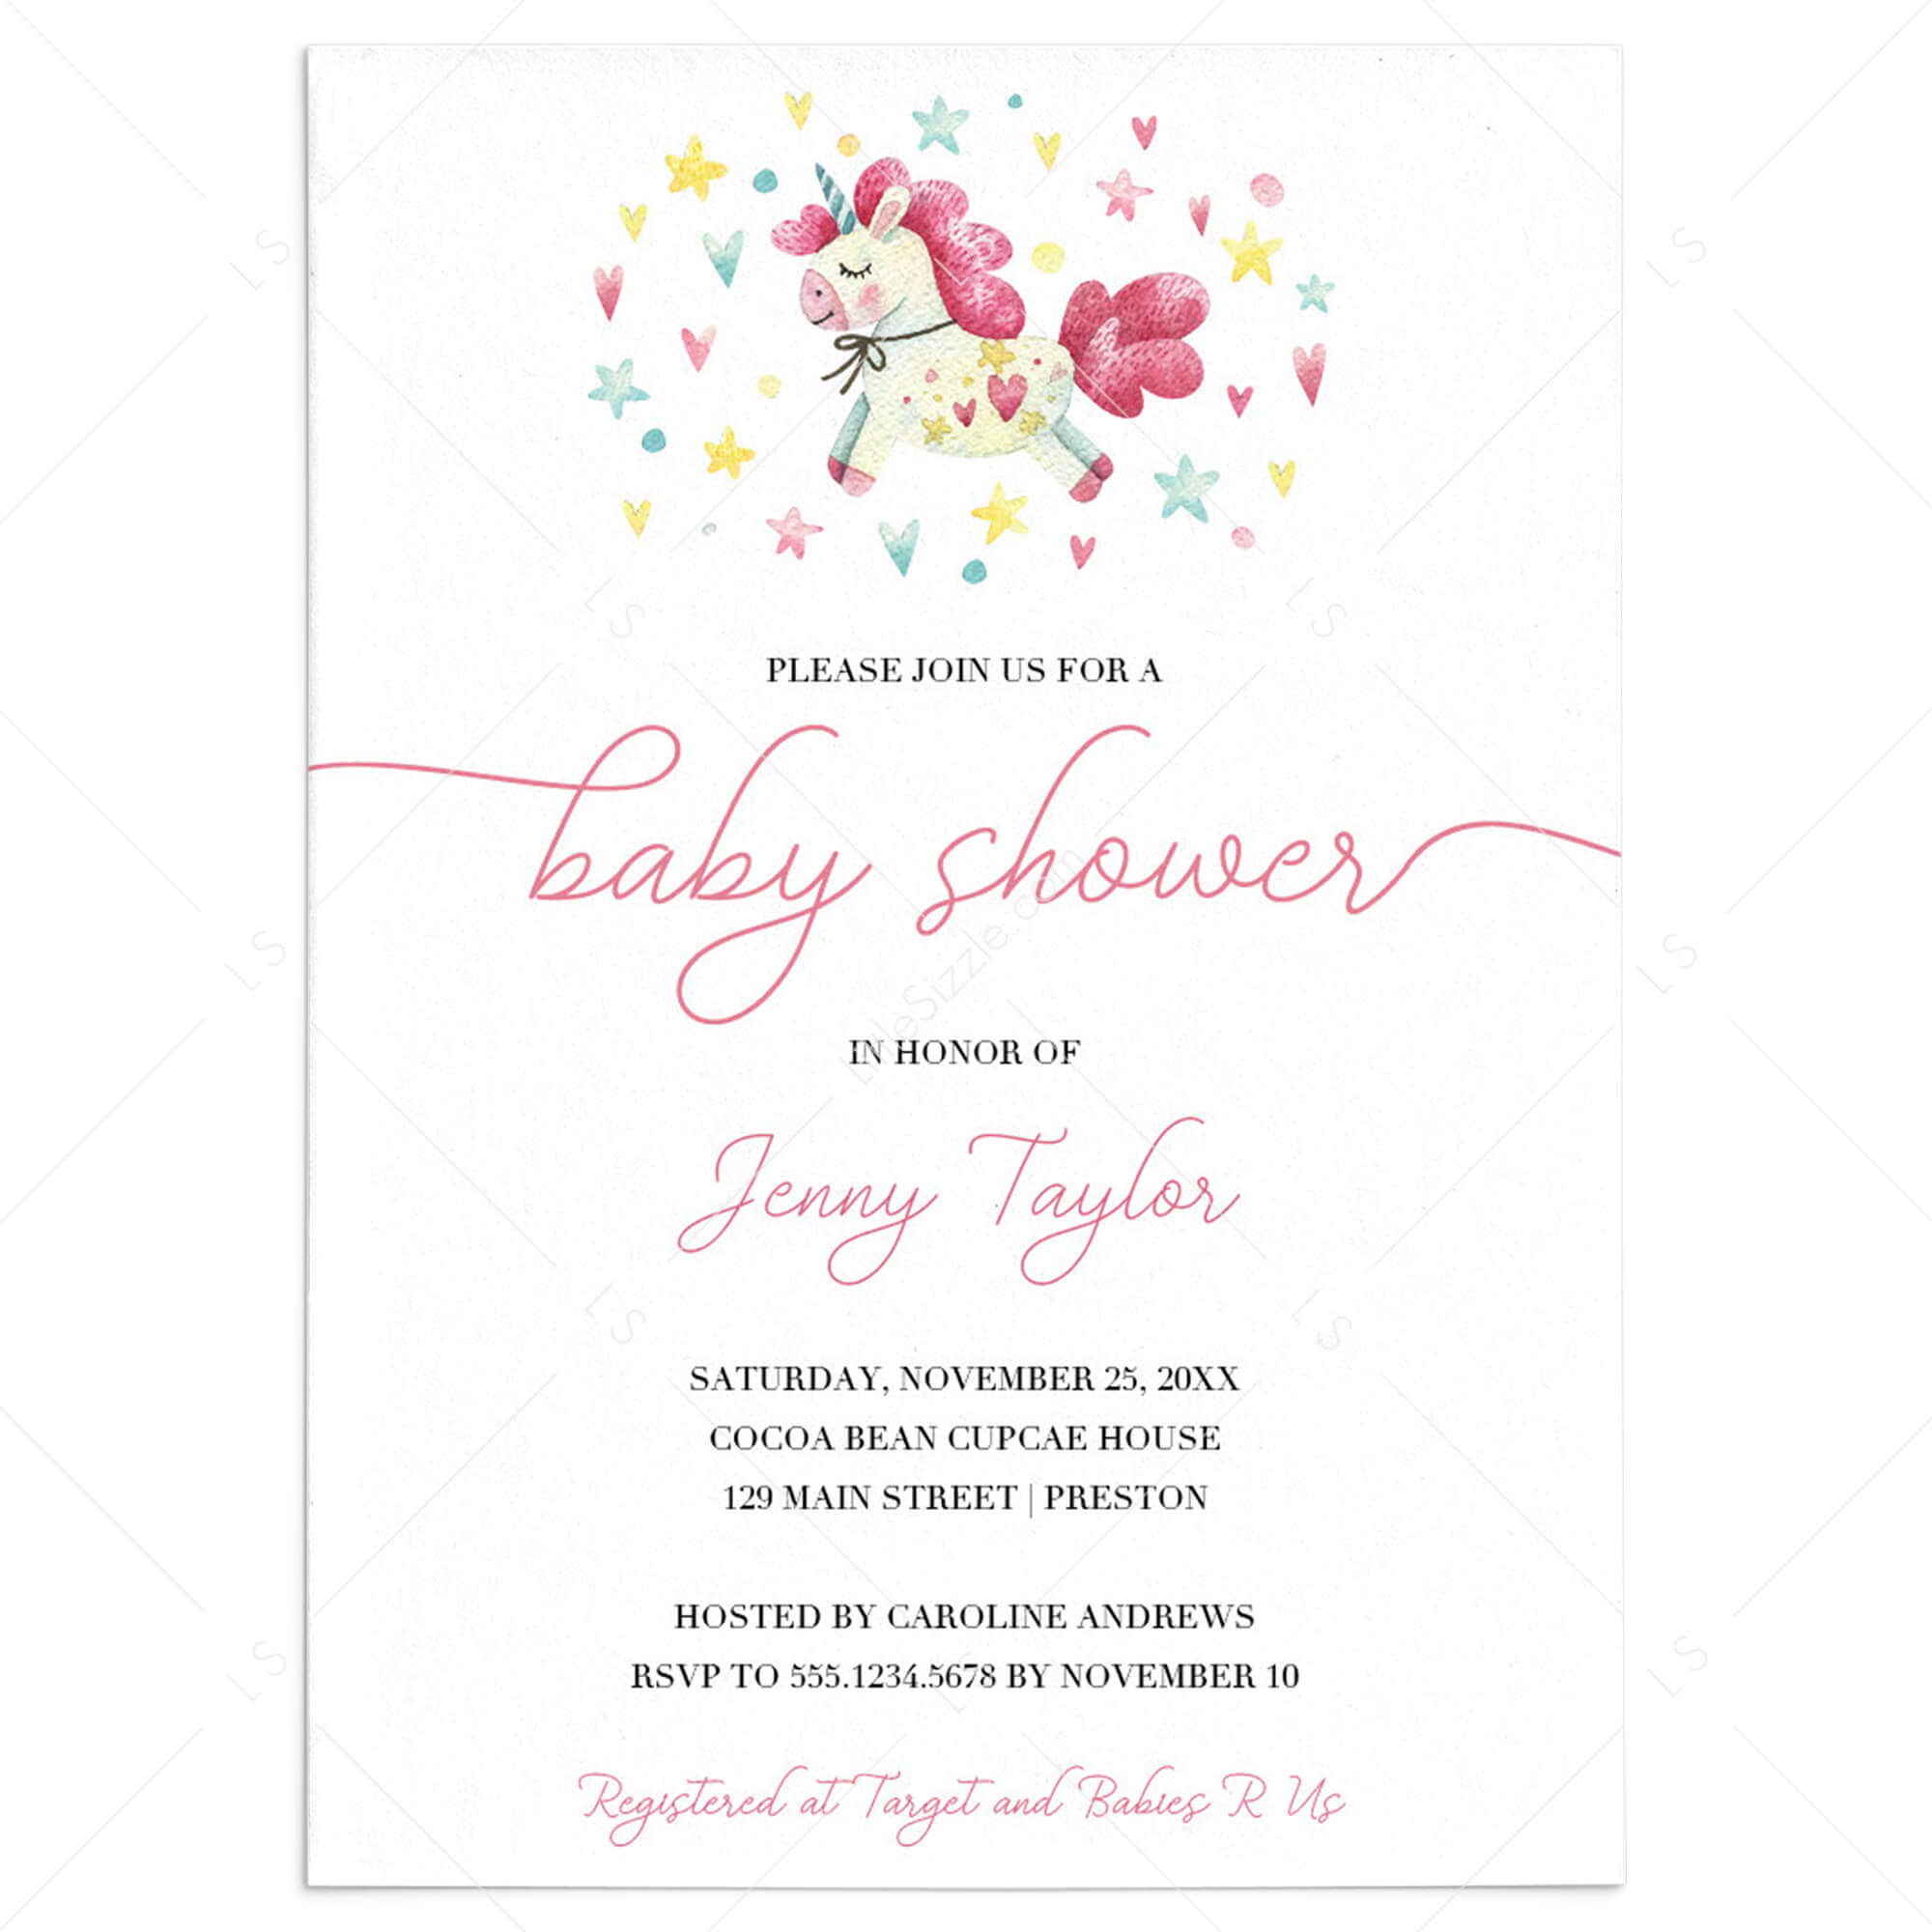 Unicorn Baby Shower Invitation Template by LittleSizzle